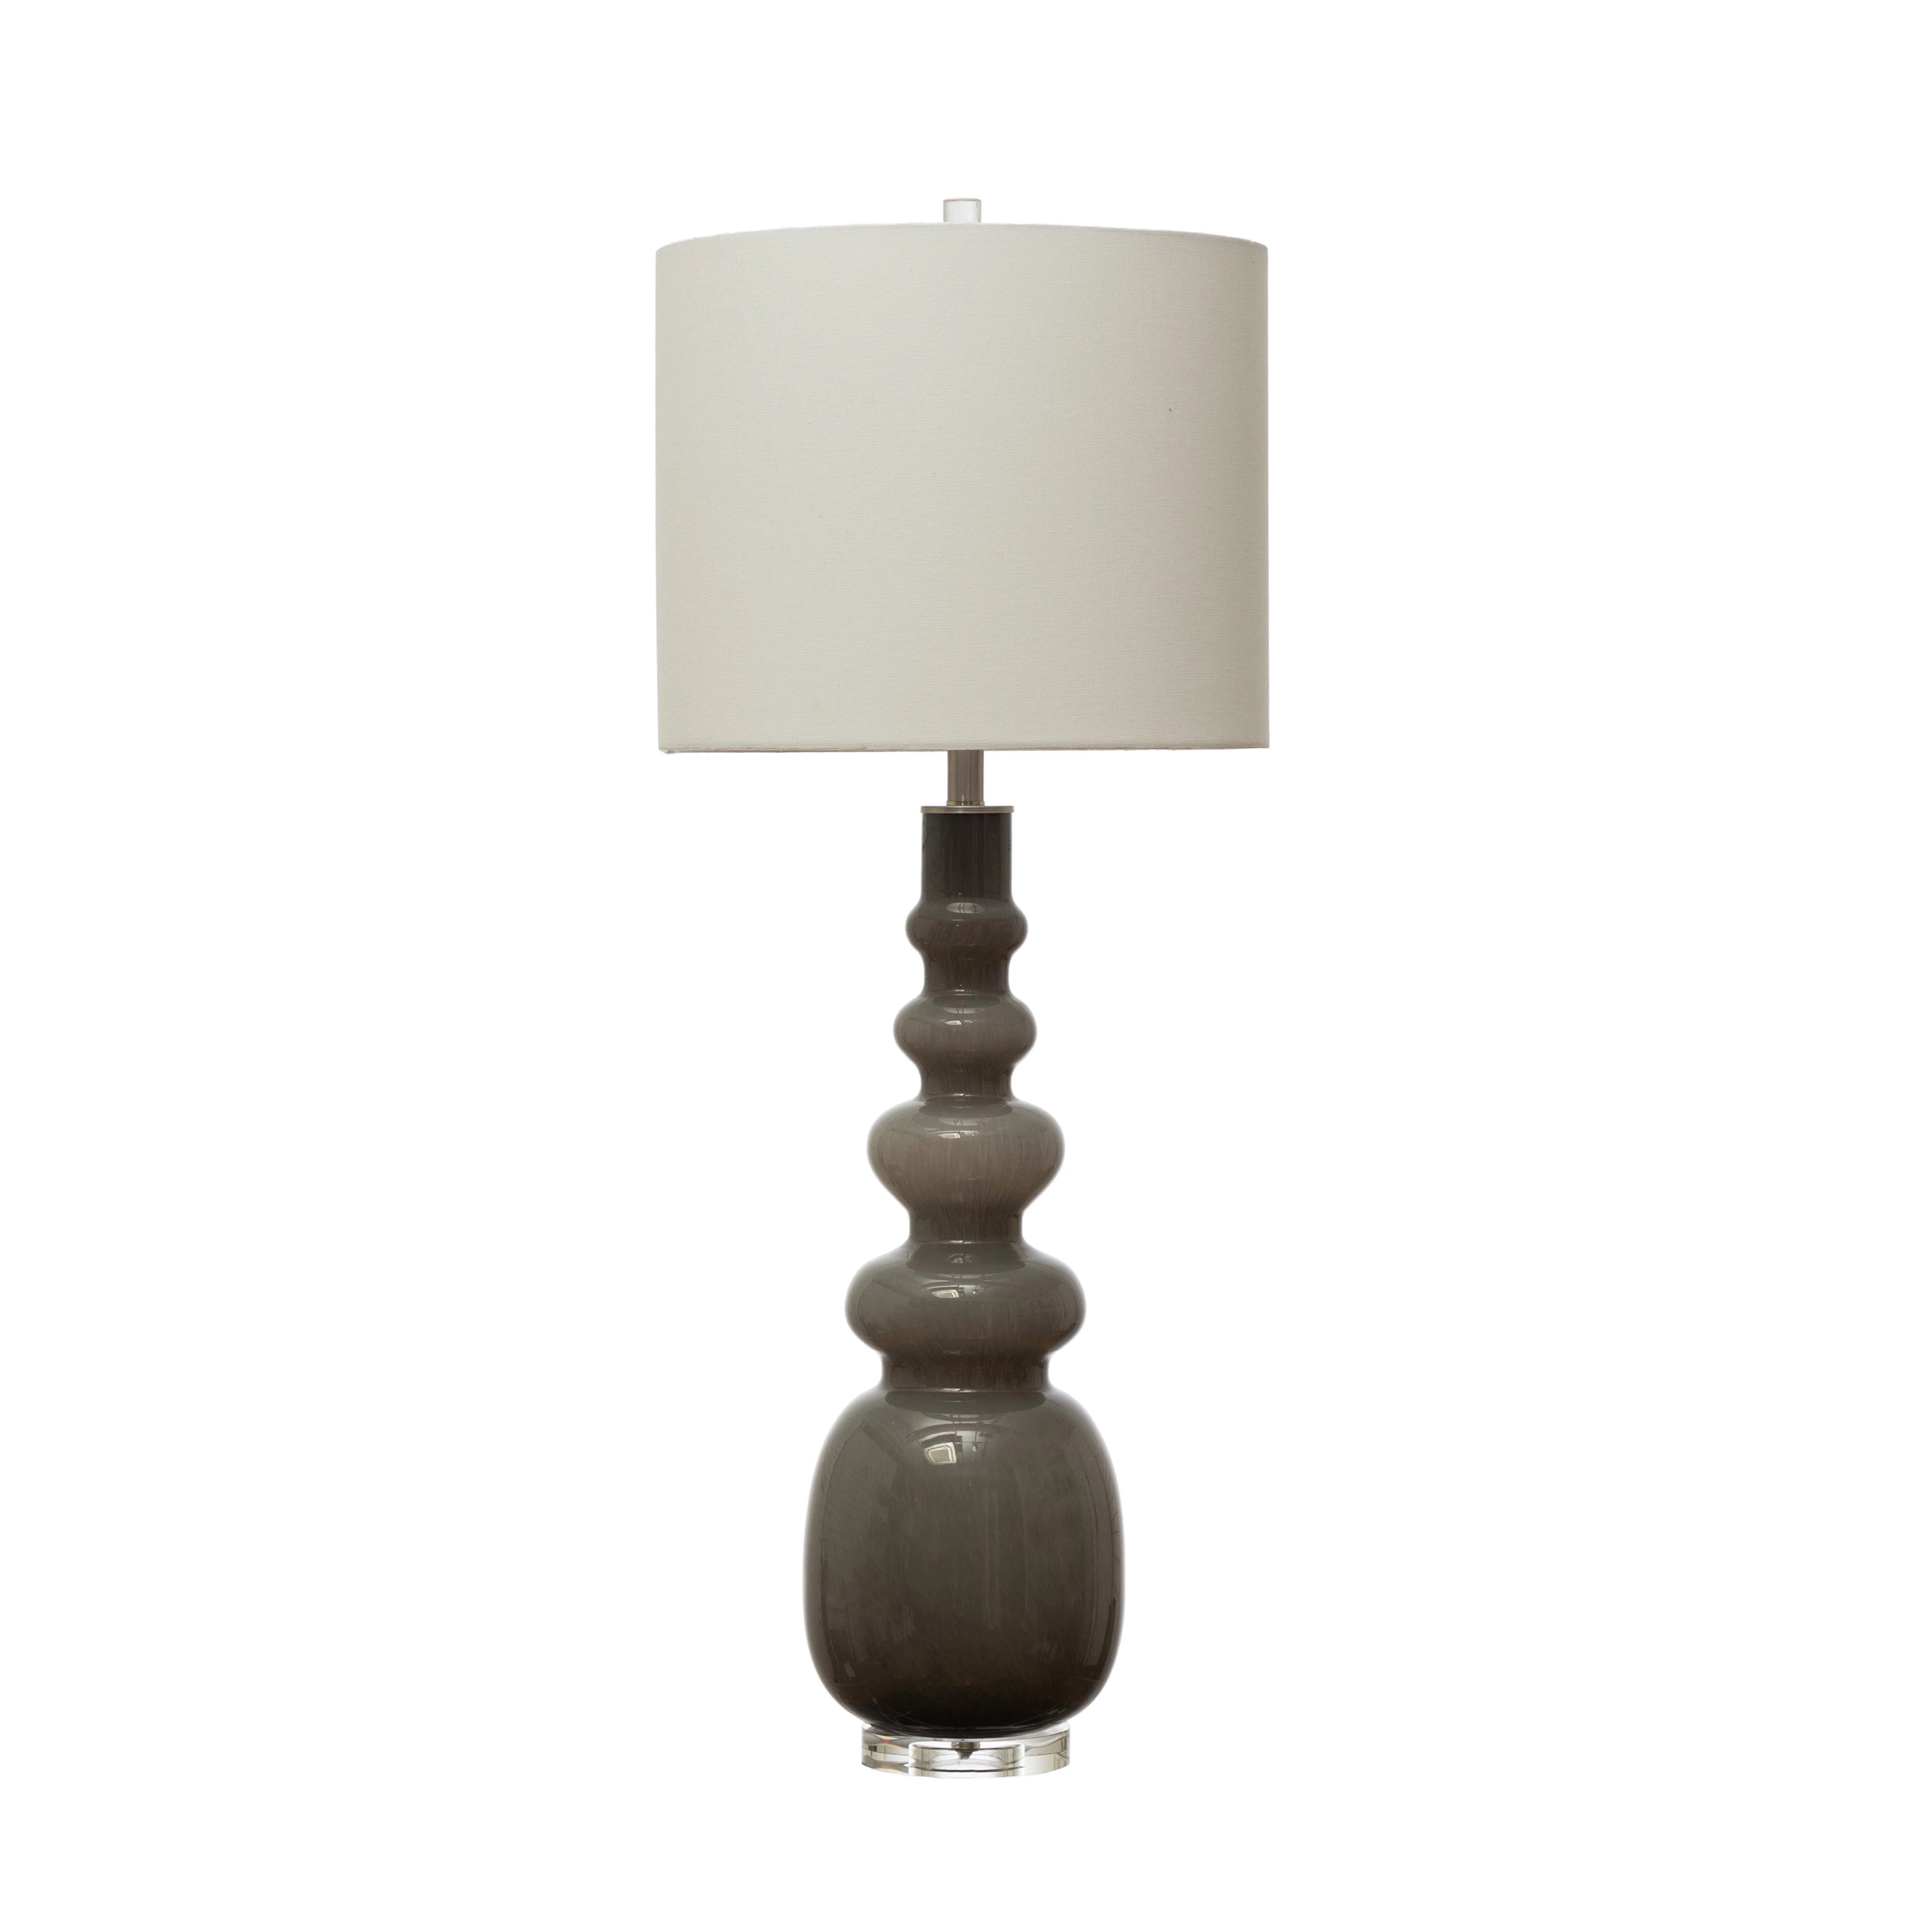 Grey Glass Floor or Table Lamp